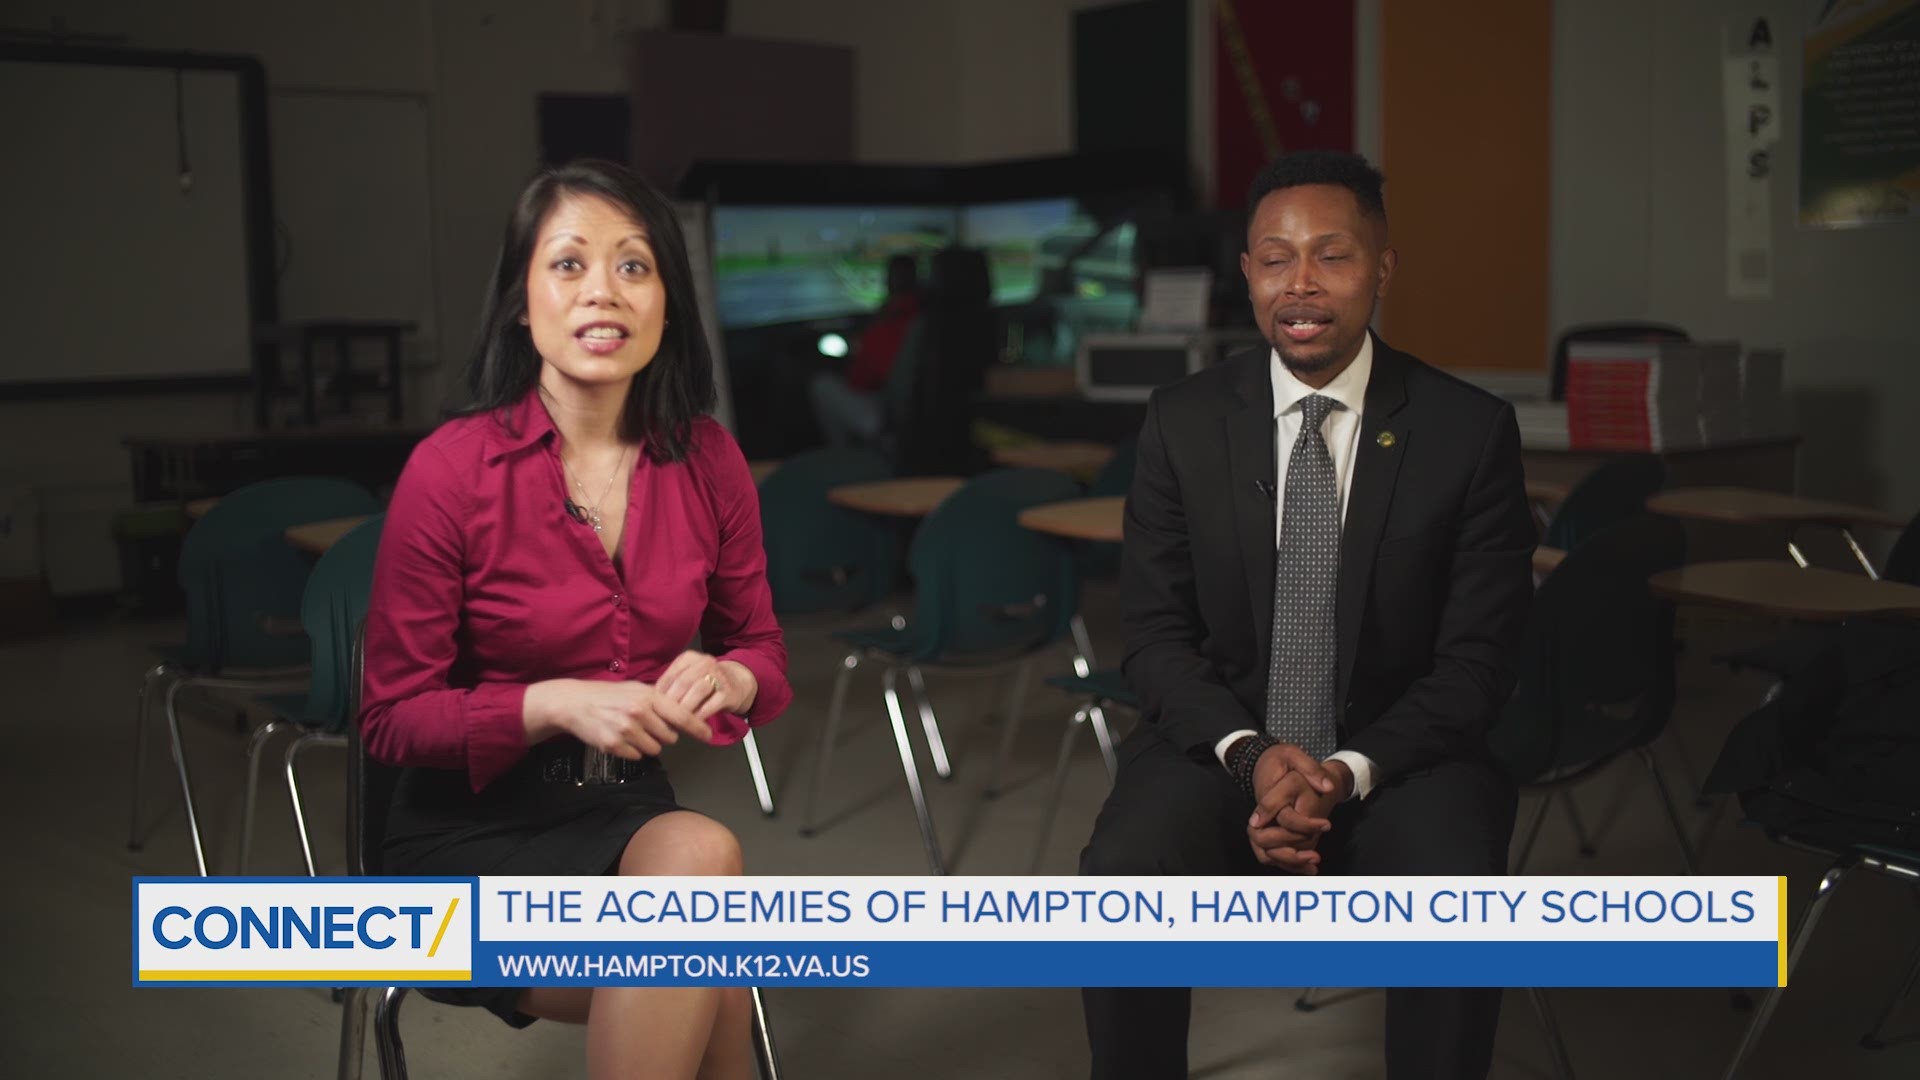 Hampton City Schools is embracing a more career-focused education for students.